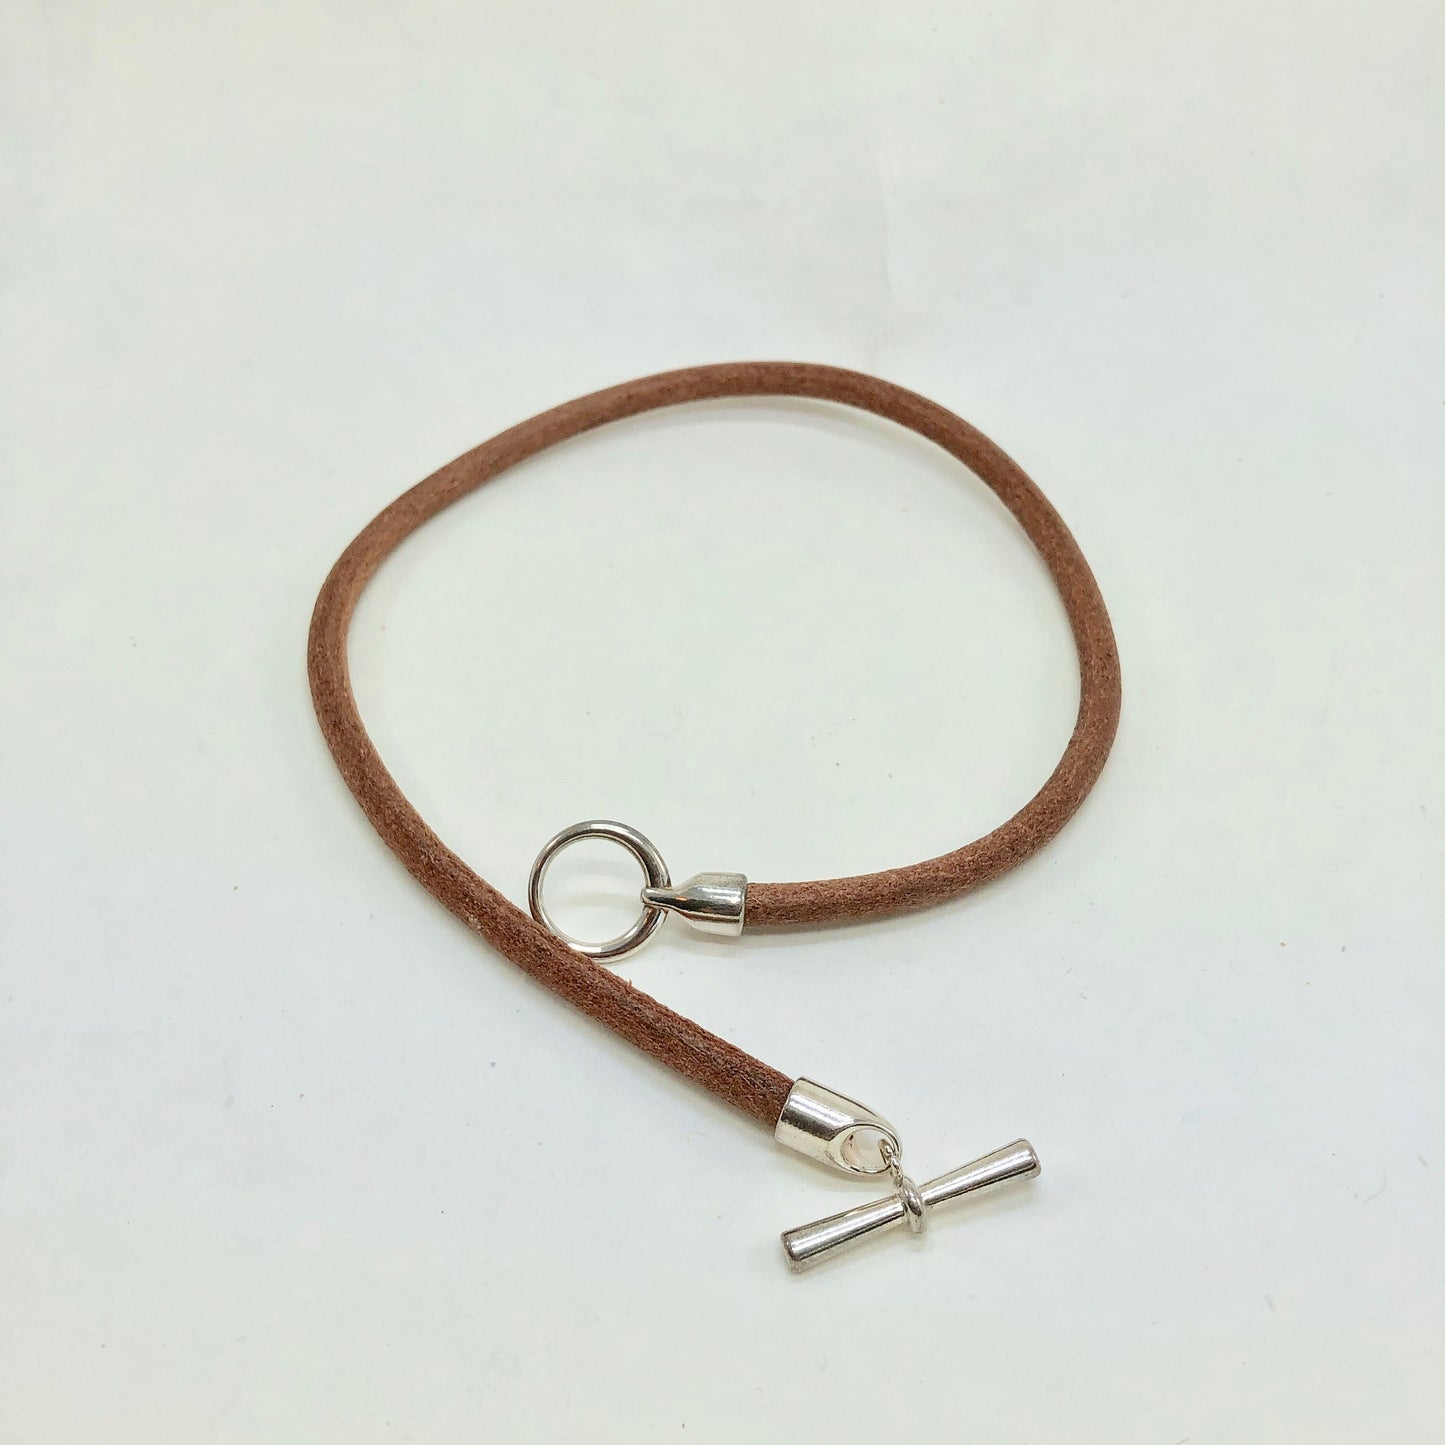 Beautiful Italian brown leather choker necklace fashioned with a center silver toggle clasp.